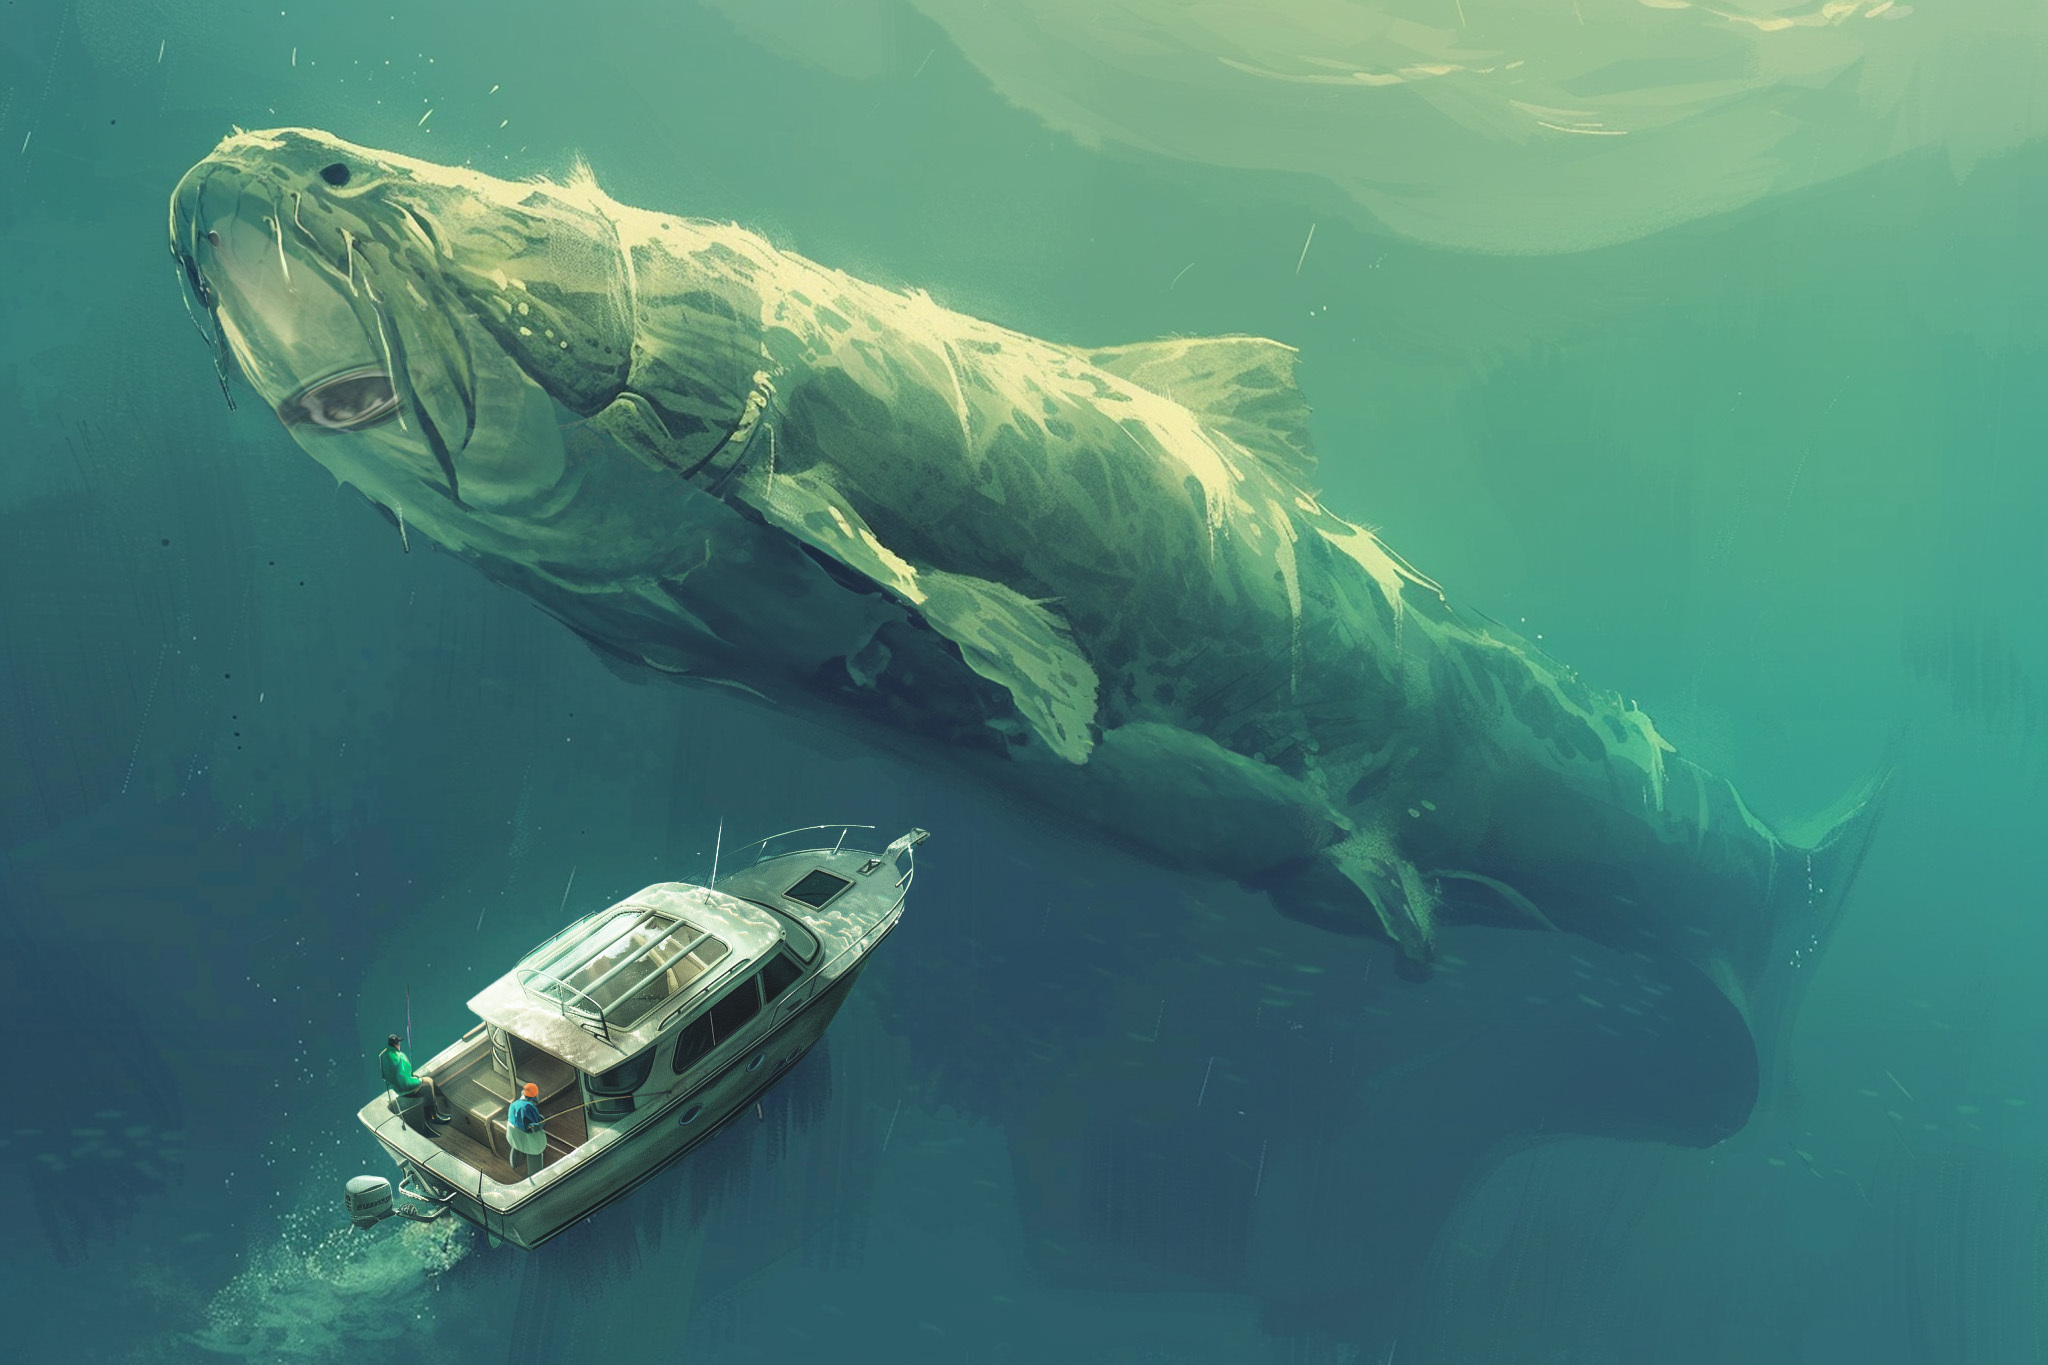 An illustration of a huge sturgeon beside a small boat on open water.